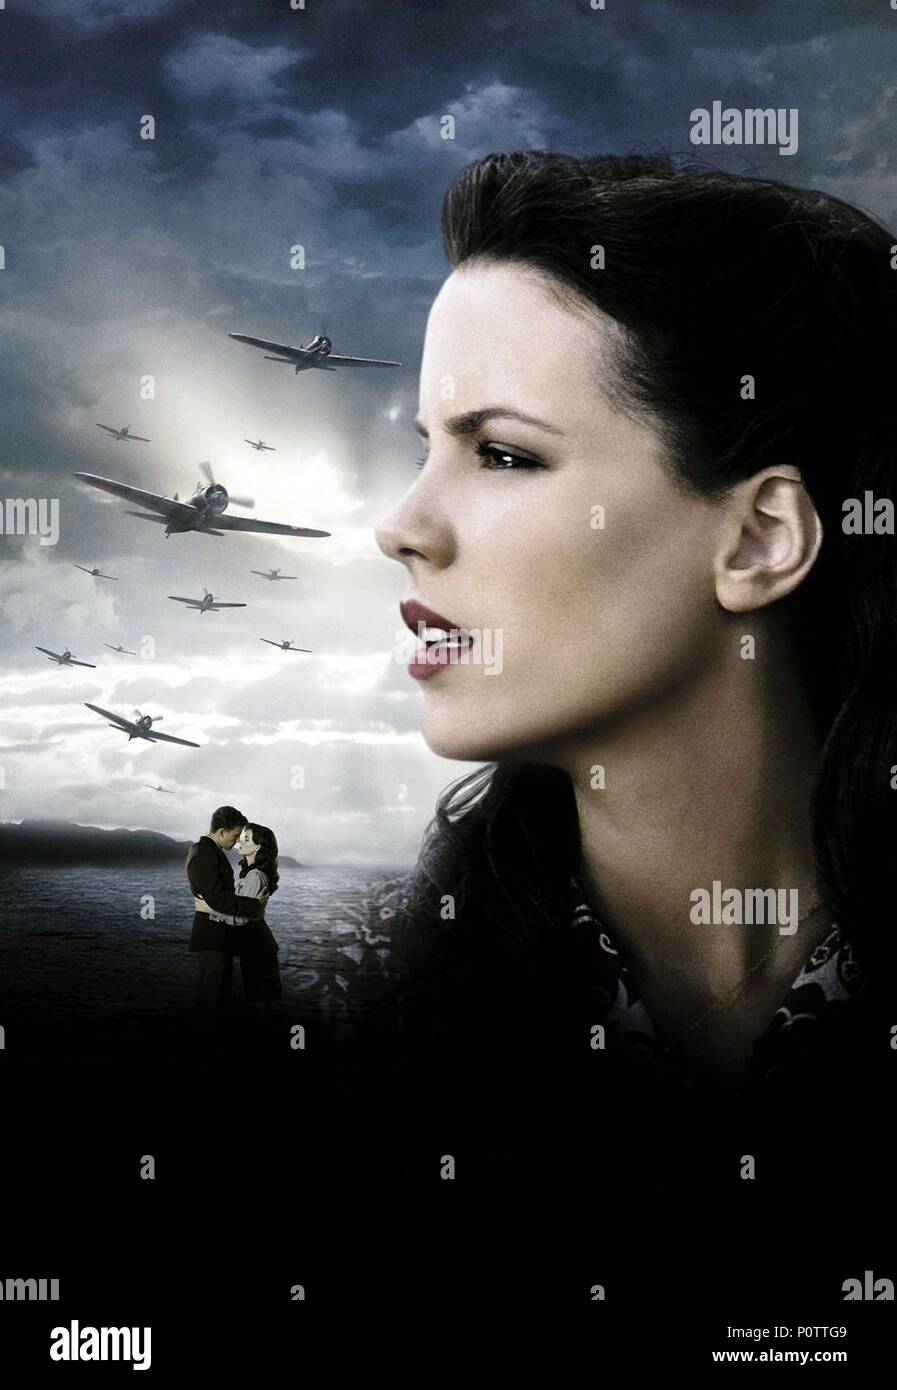 Original Film Title: PEARL HARBOR.  English Title: PEARL HARBOR.  Film Director: MICHAEL BAY.  Year: 2001.  Stars: KATE BECKINSALE. Credit: TOUCHSTONE PICTURES / Album Stock Photo